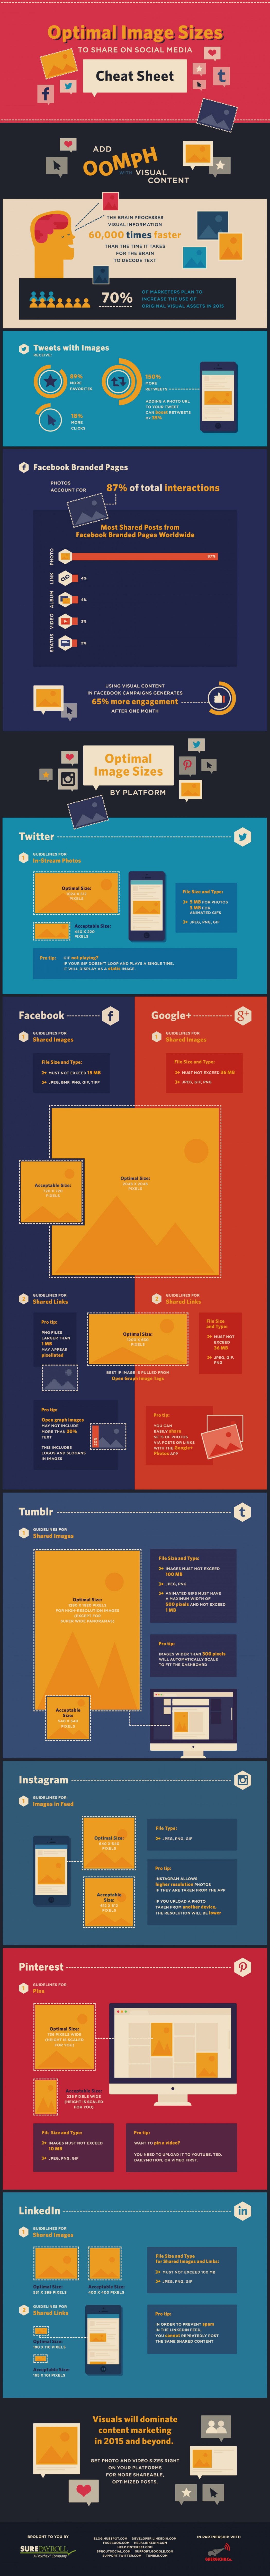 Optimal Image Sizes to Share on Social Media Cheat Sheet infographic